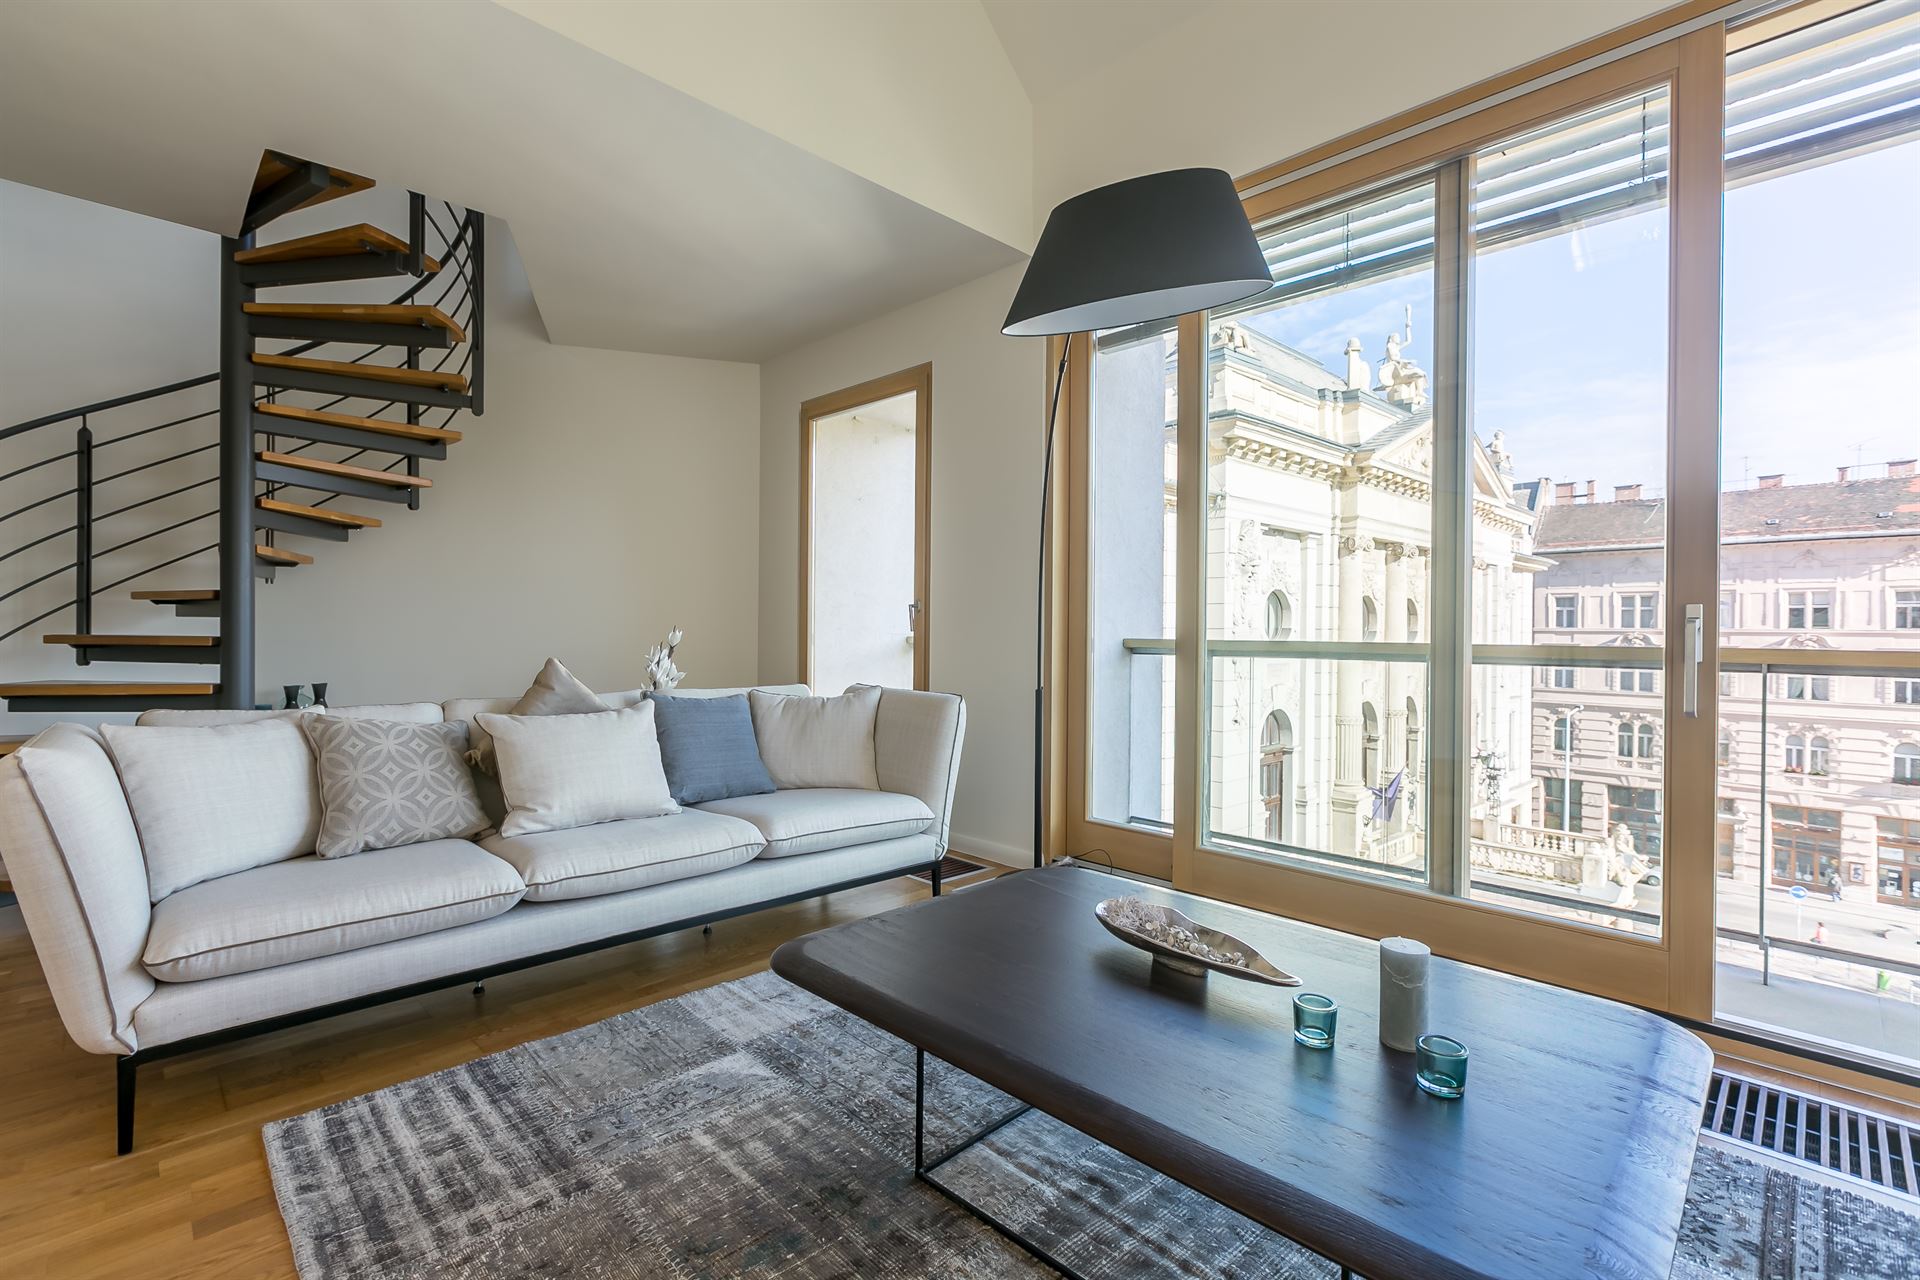 budapest-luxurious-properties-rental-luxury-apartment-for-rent-budapest-near-castle-buda-rental-exlusive-large-flat-with-view-panorama12